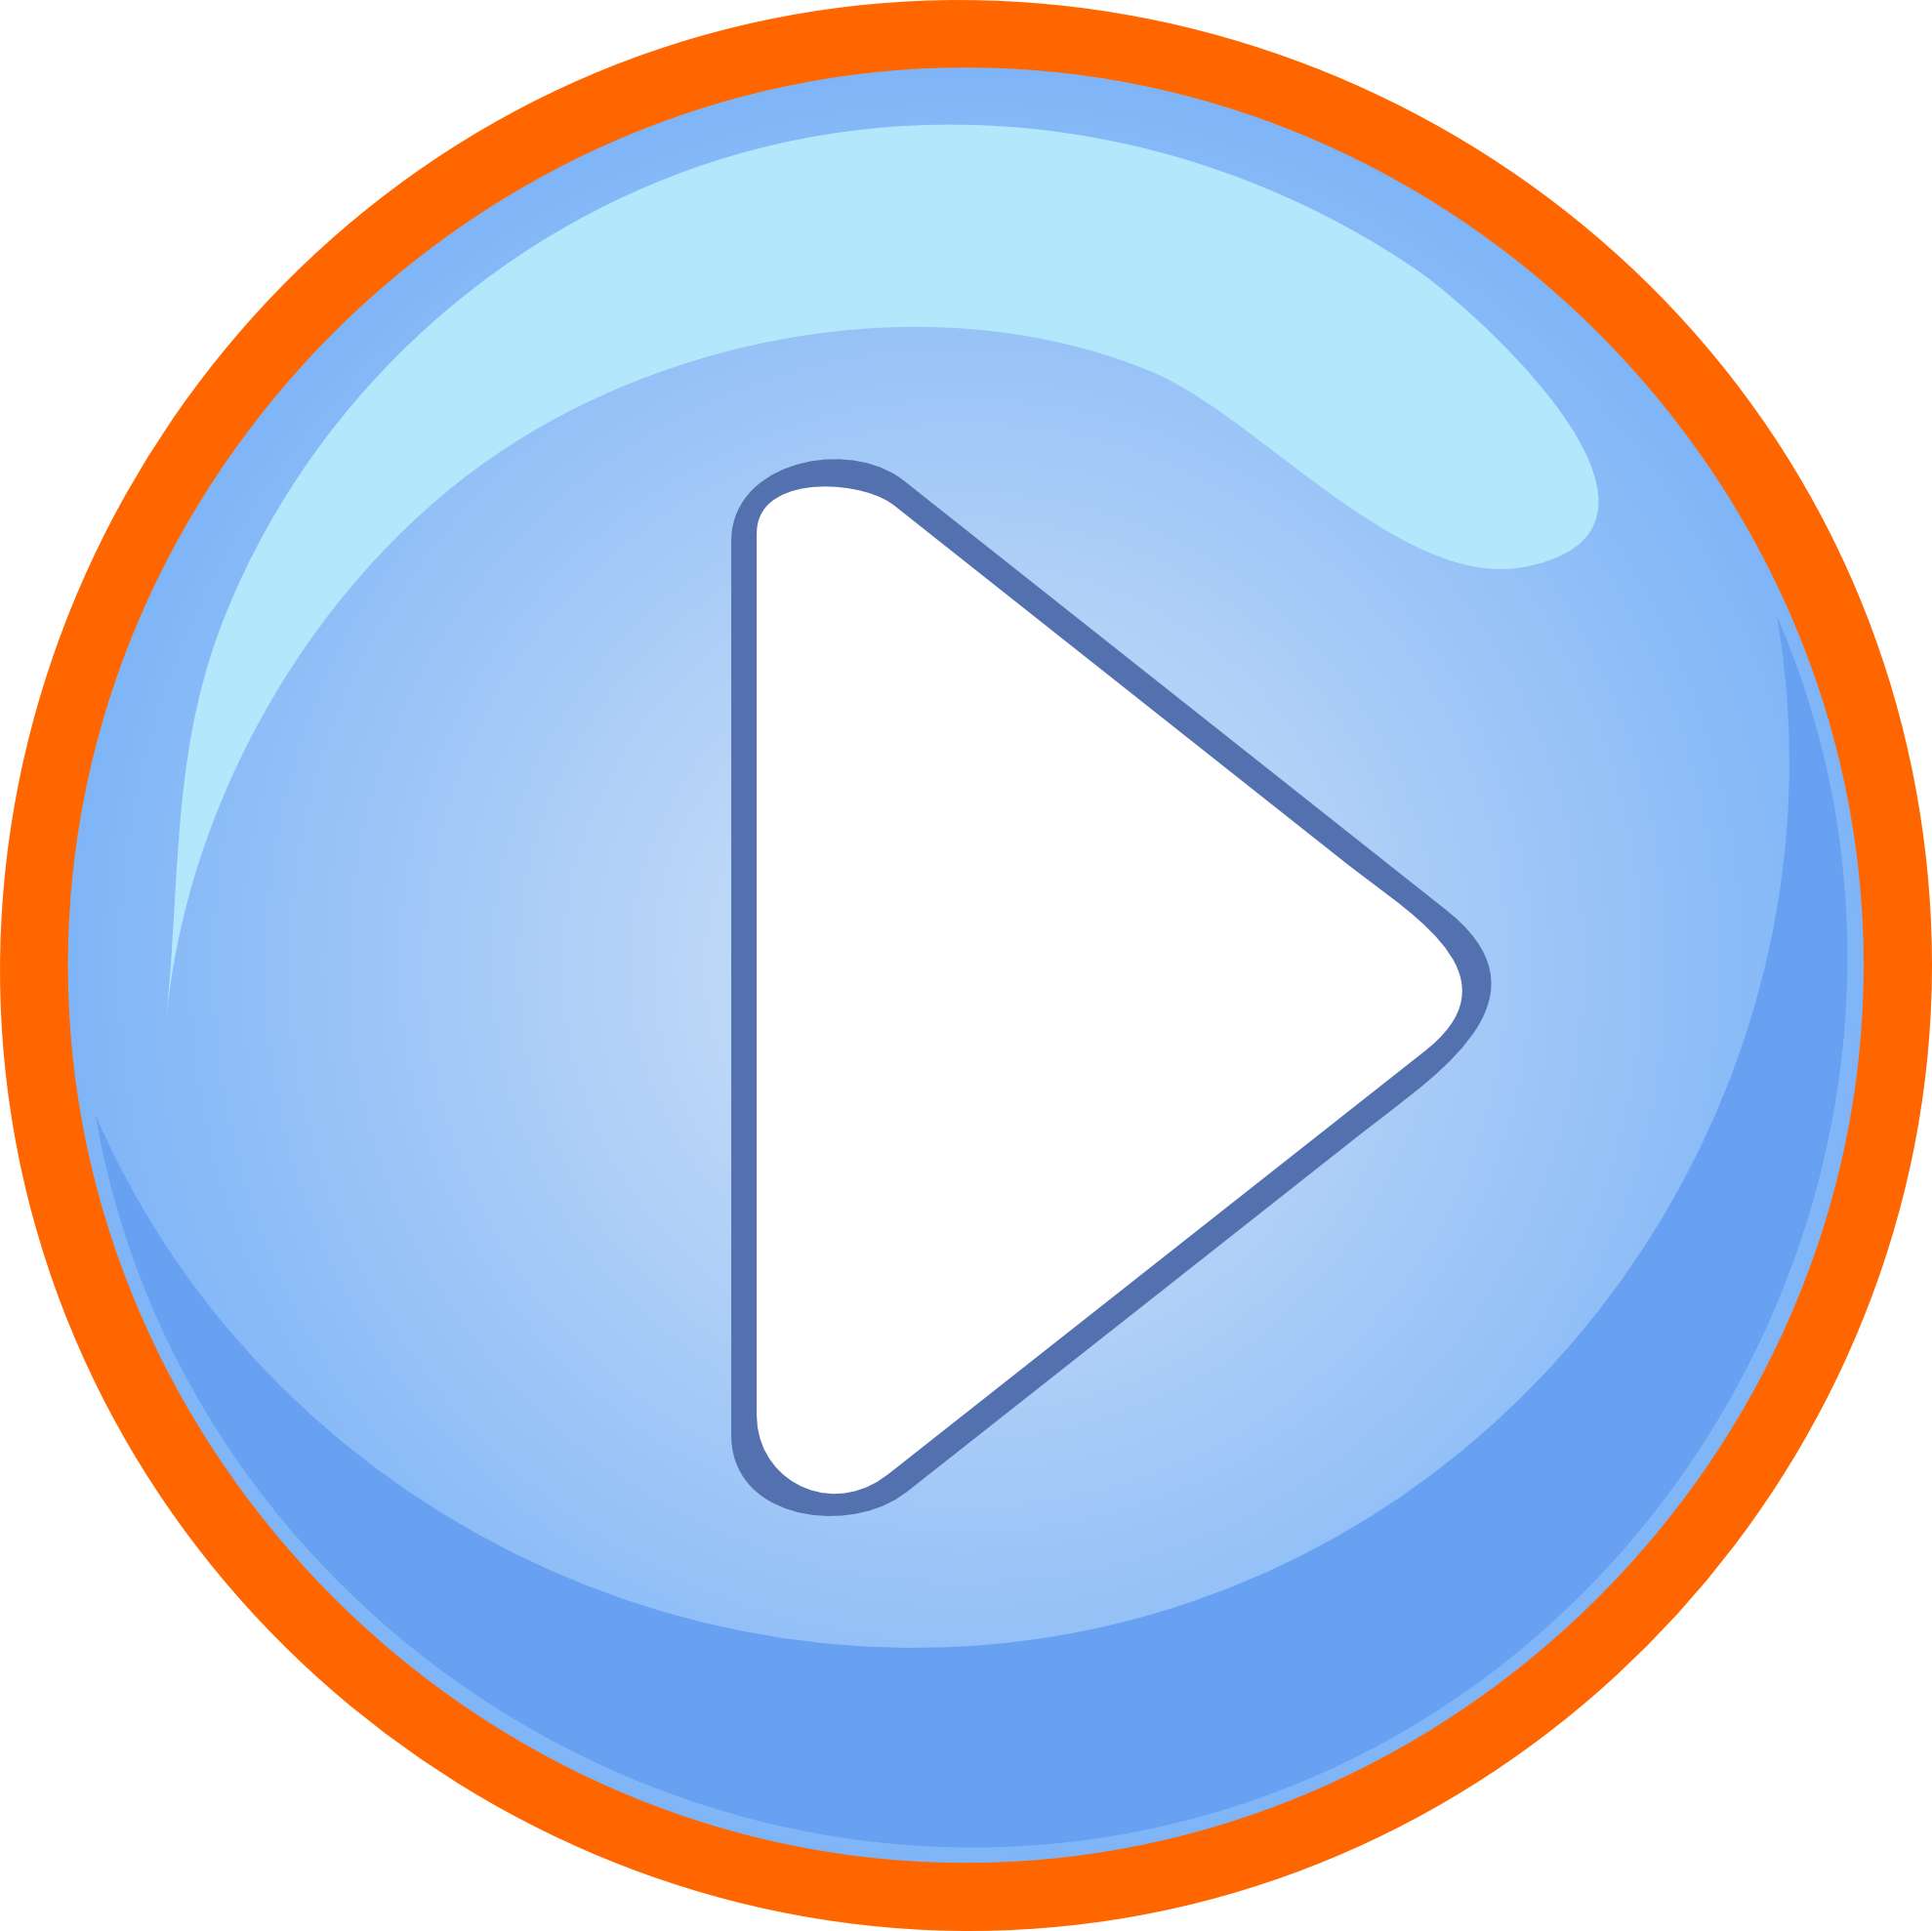 Blue Play Button With Focus SVG